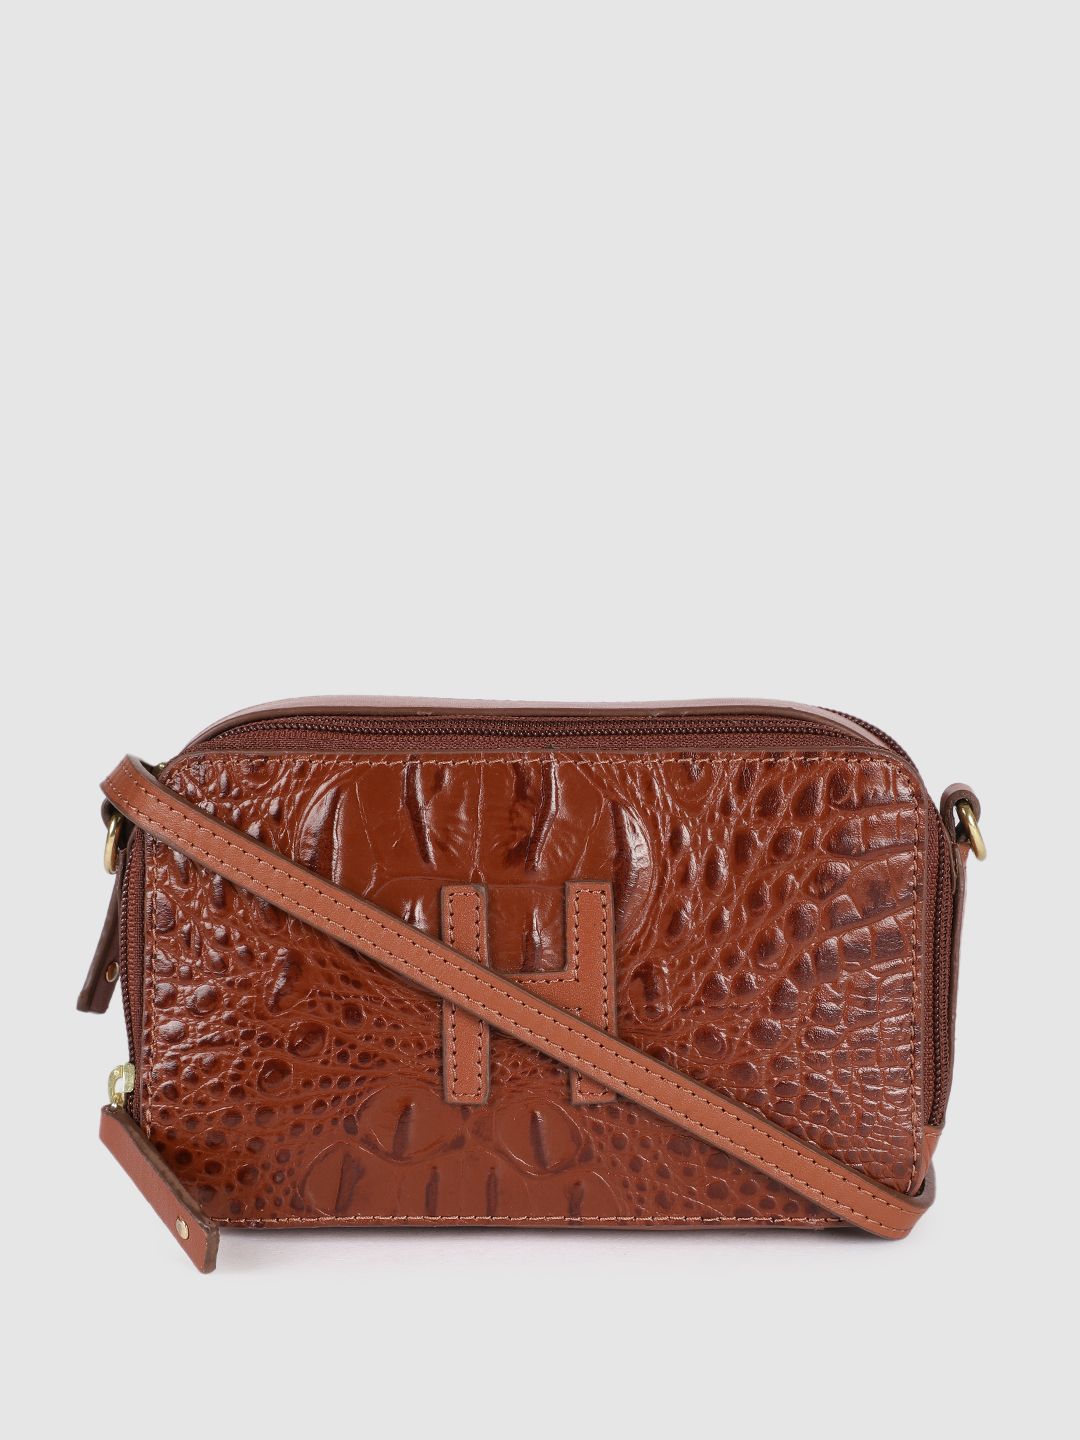 Hidesign Tan Animal Textured Leather Structured Sling Bag Price in India